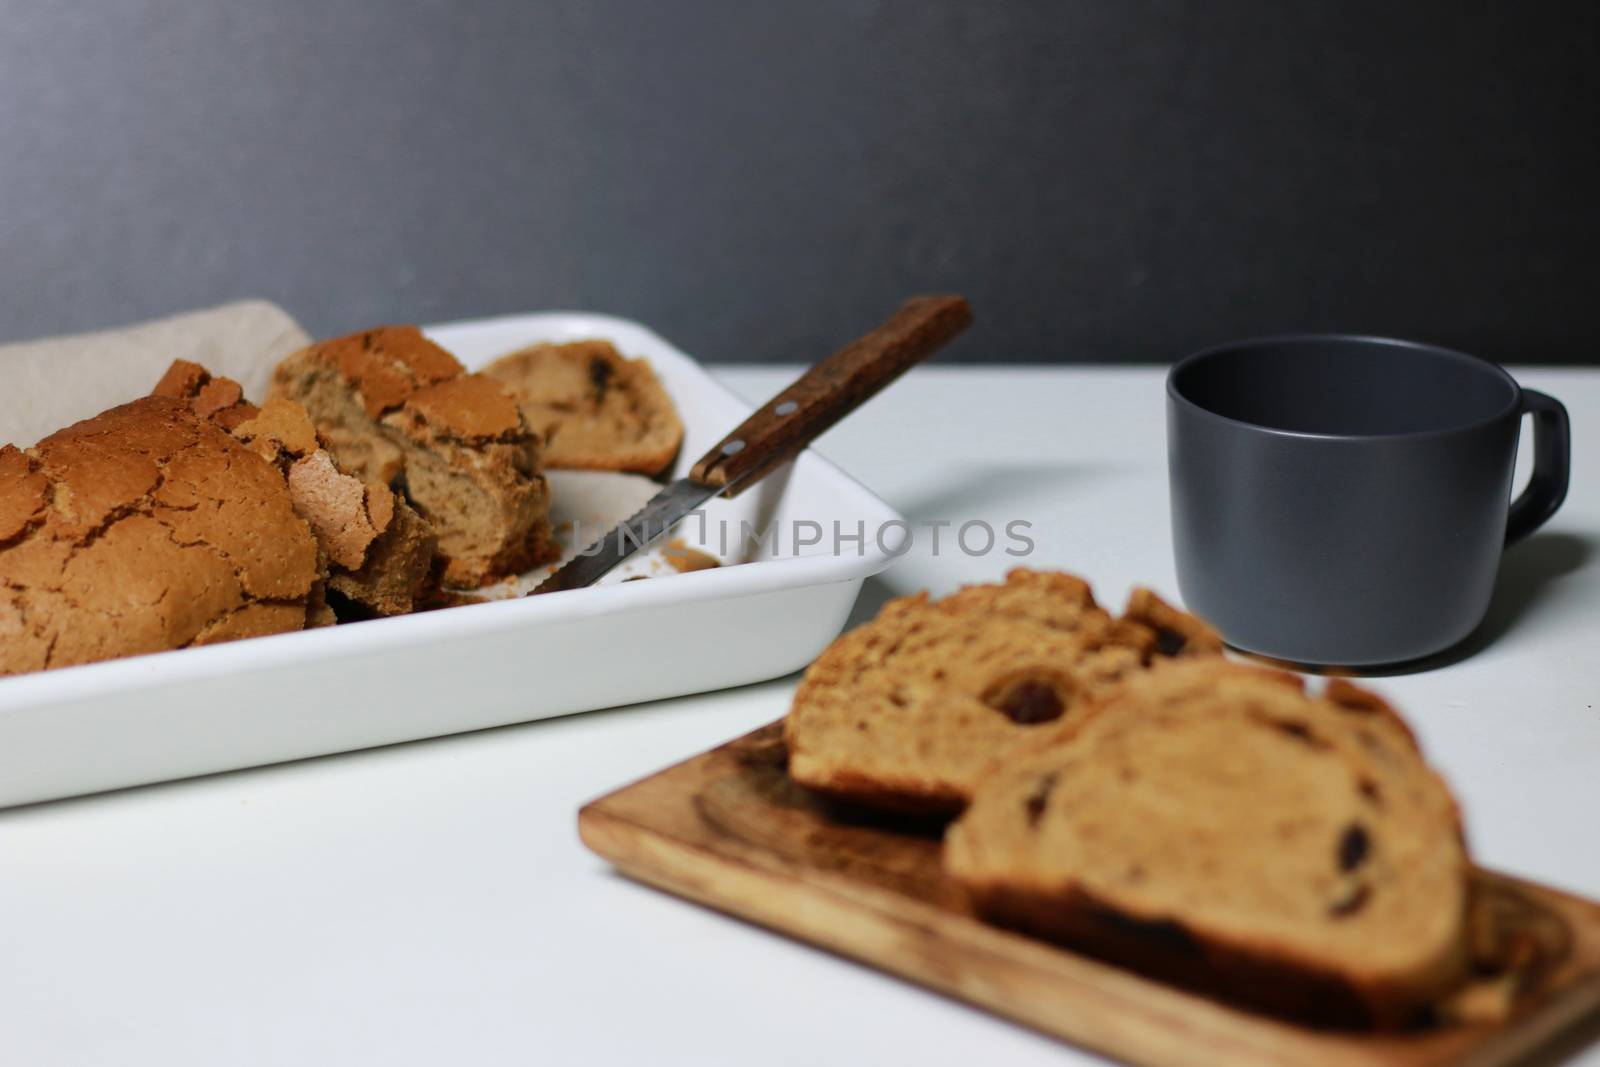 Two slices of bread and mug on table by uphotopia